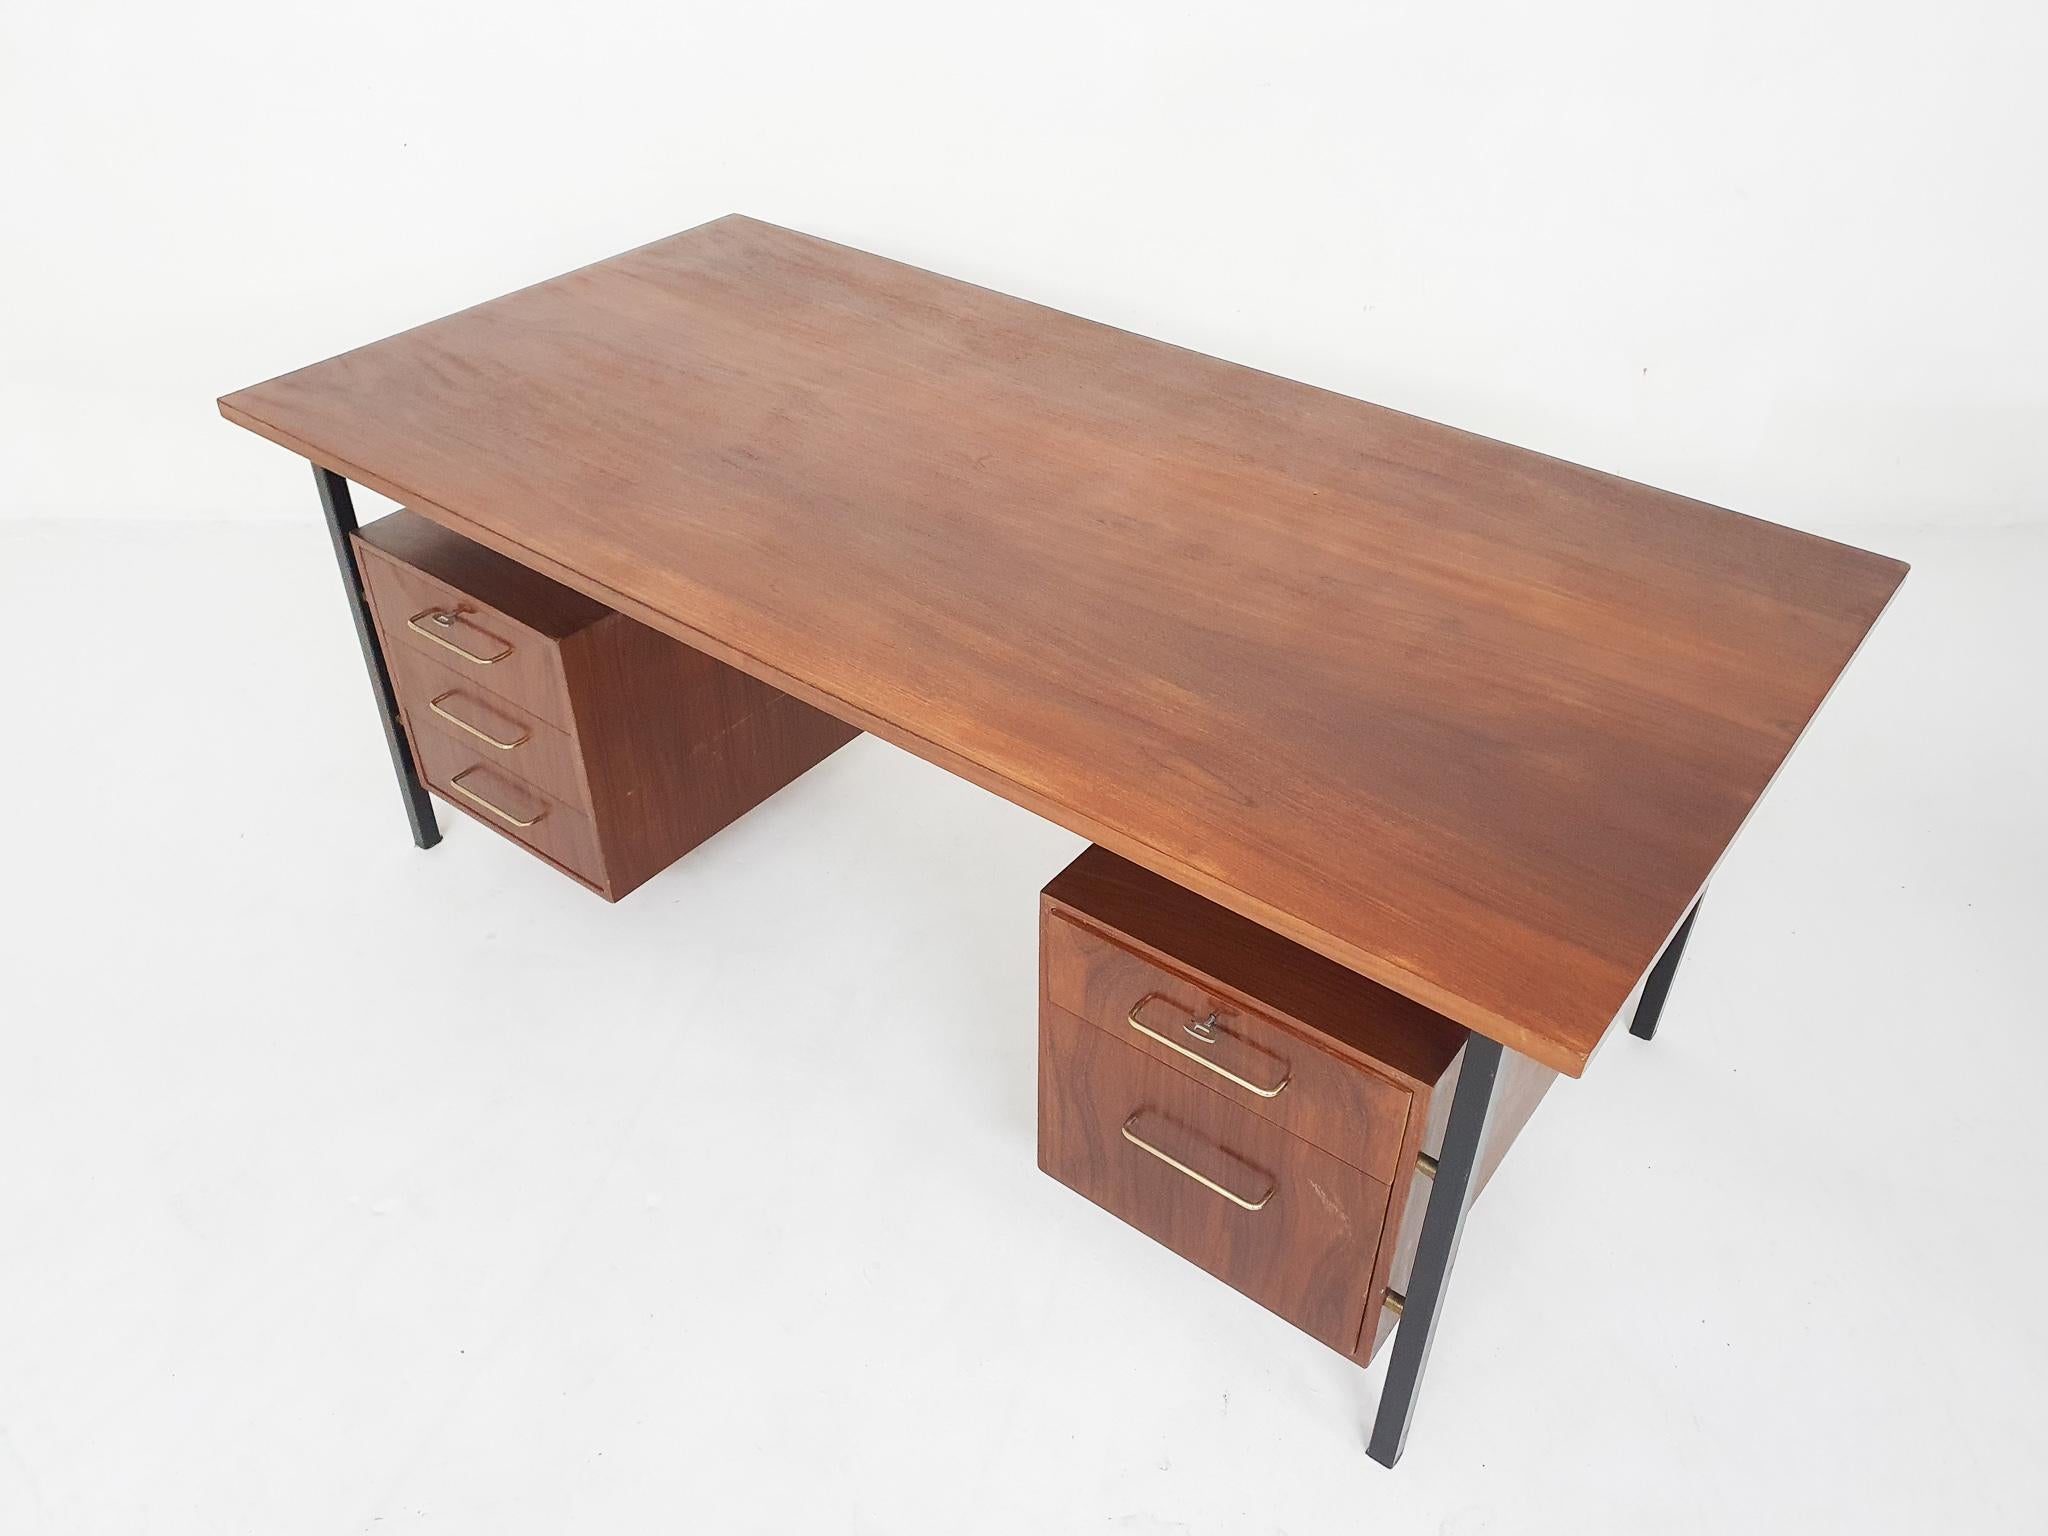 Beautiful large exuctive desk with a black metal frame and teak veneer top and drawers. The drawers have brass handles and can be locked with two original keys. 

In the style of Fristho or Pastoe.

We have sand and laquered the